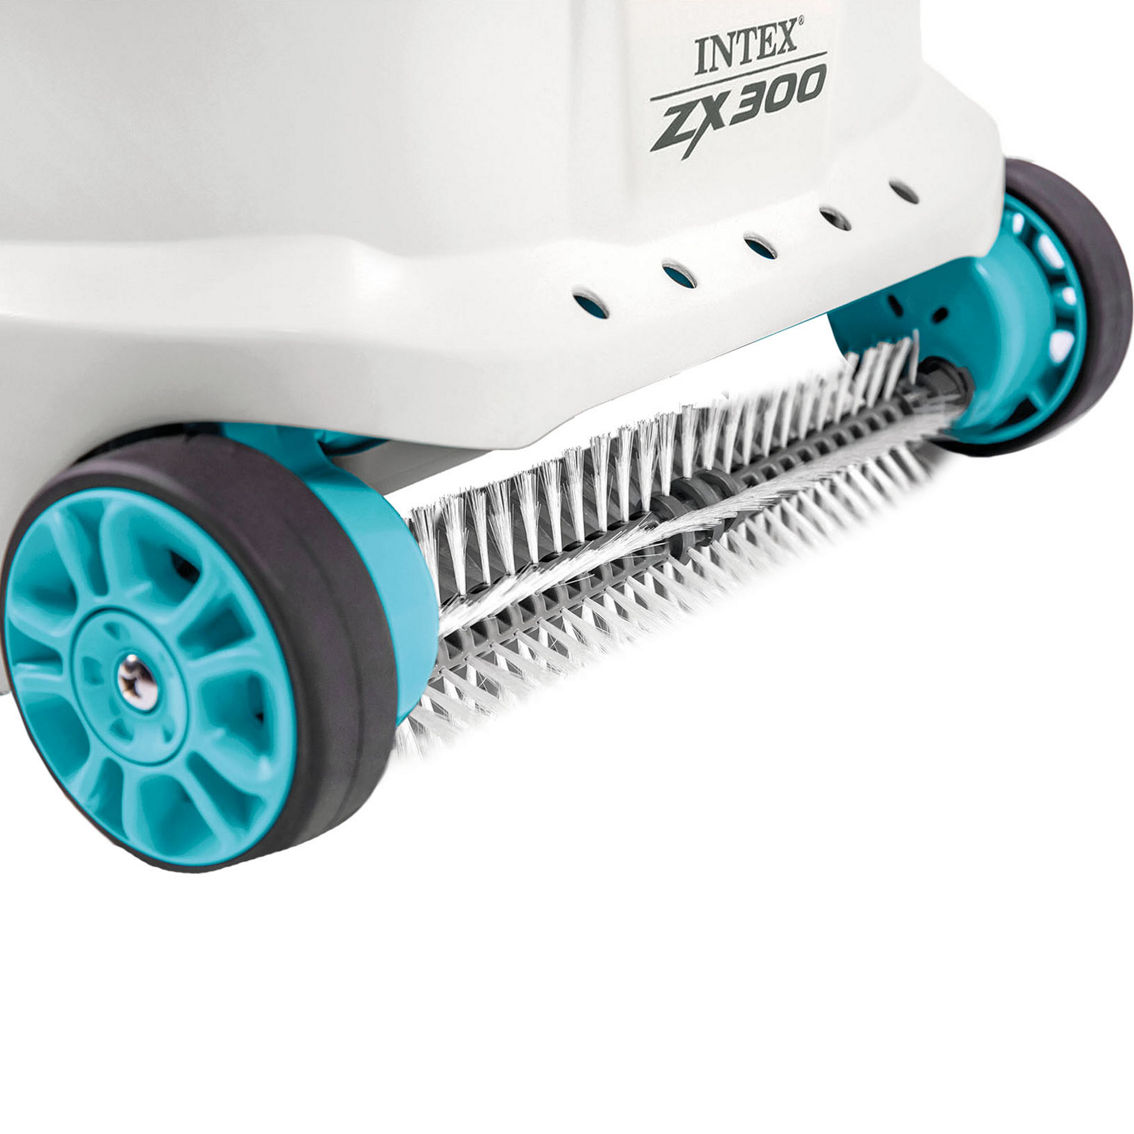 Intex Deluxe Auto Pool Cleaner - Image 4 of 5